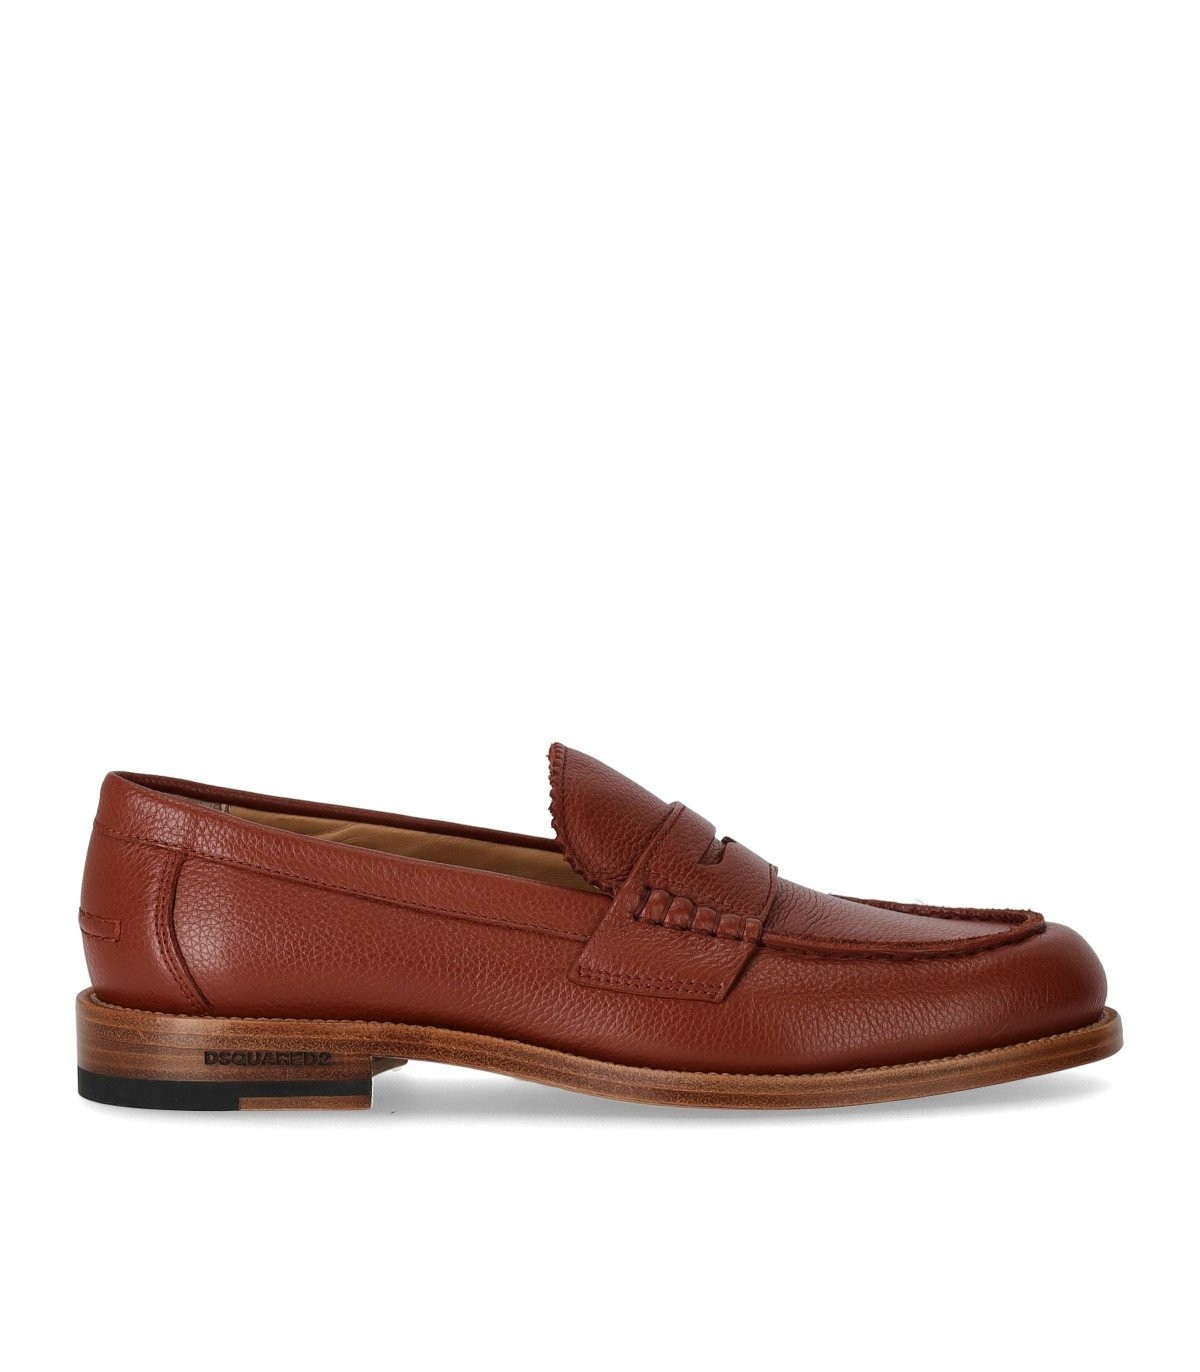 Dsquared2 Beau Brown Loafer